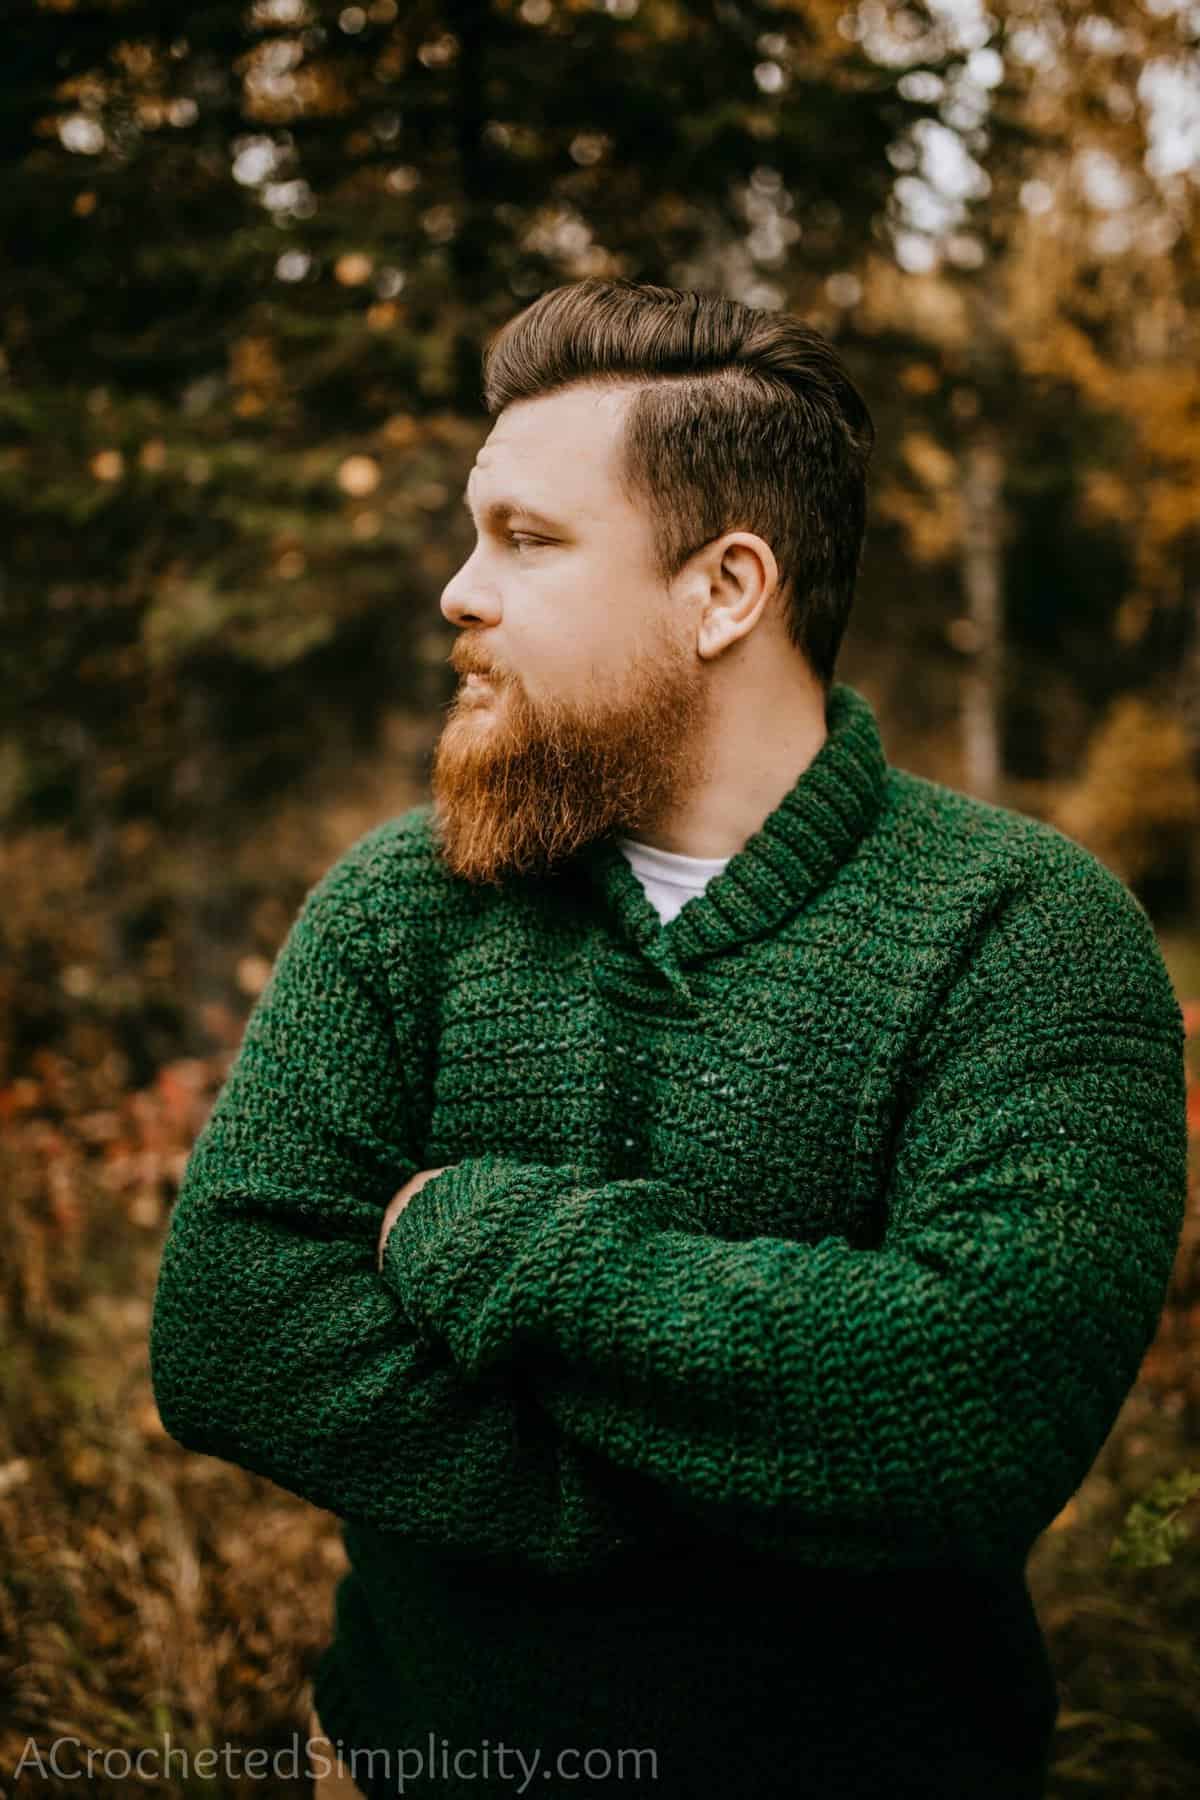 Free Crochet Sweater Pattern - Brentwood Men's Pullover by A Crocheted Simplicity #freecrochetpattern #freecrochetsweaterpattern #crochetmenssweater #crochetshawlcollarsweater #crochetmenssweater #crochetsweaterpattern #menssweater #crochetformen